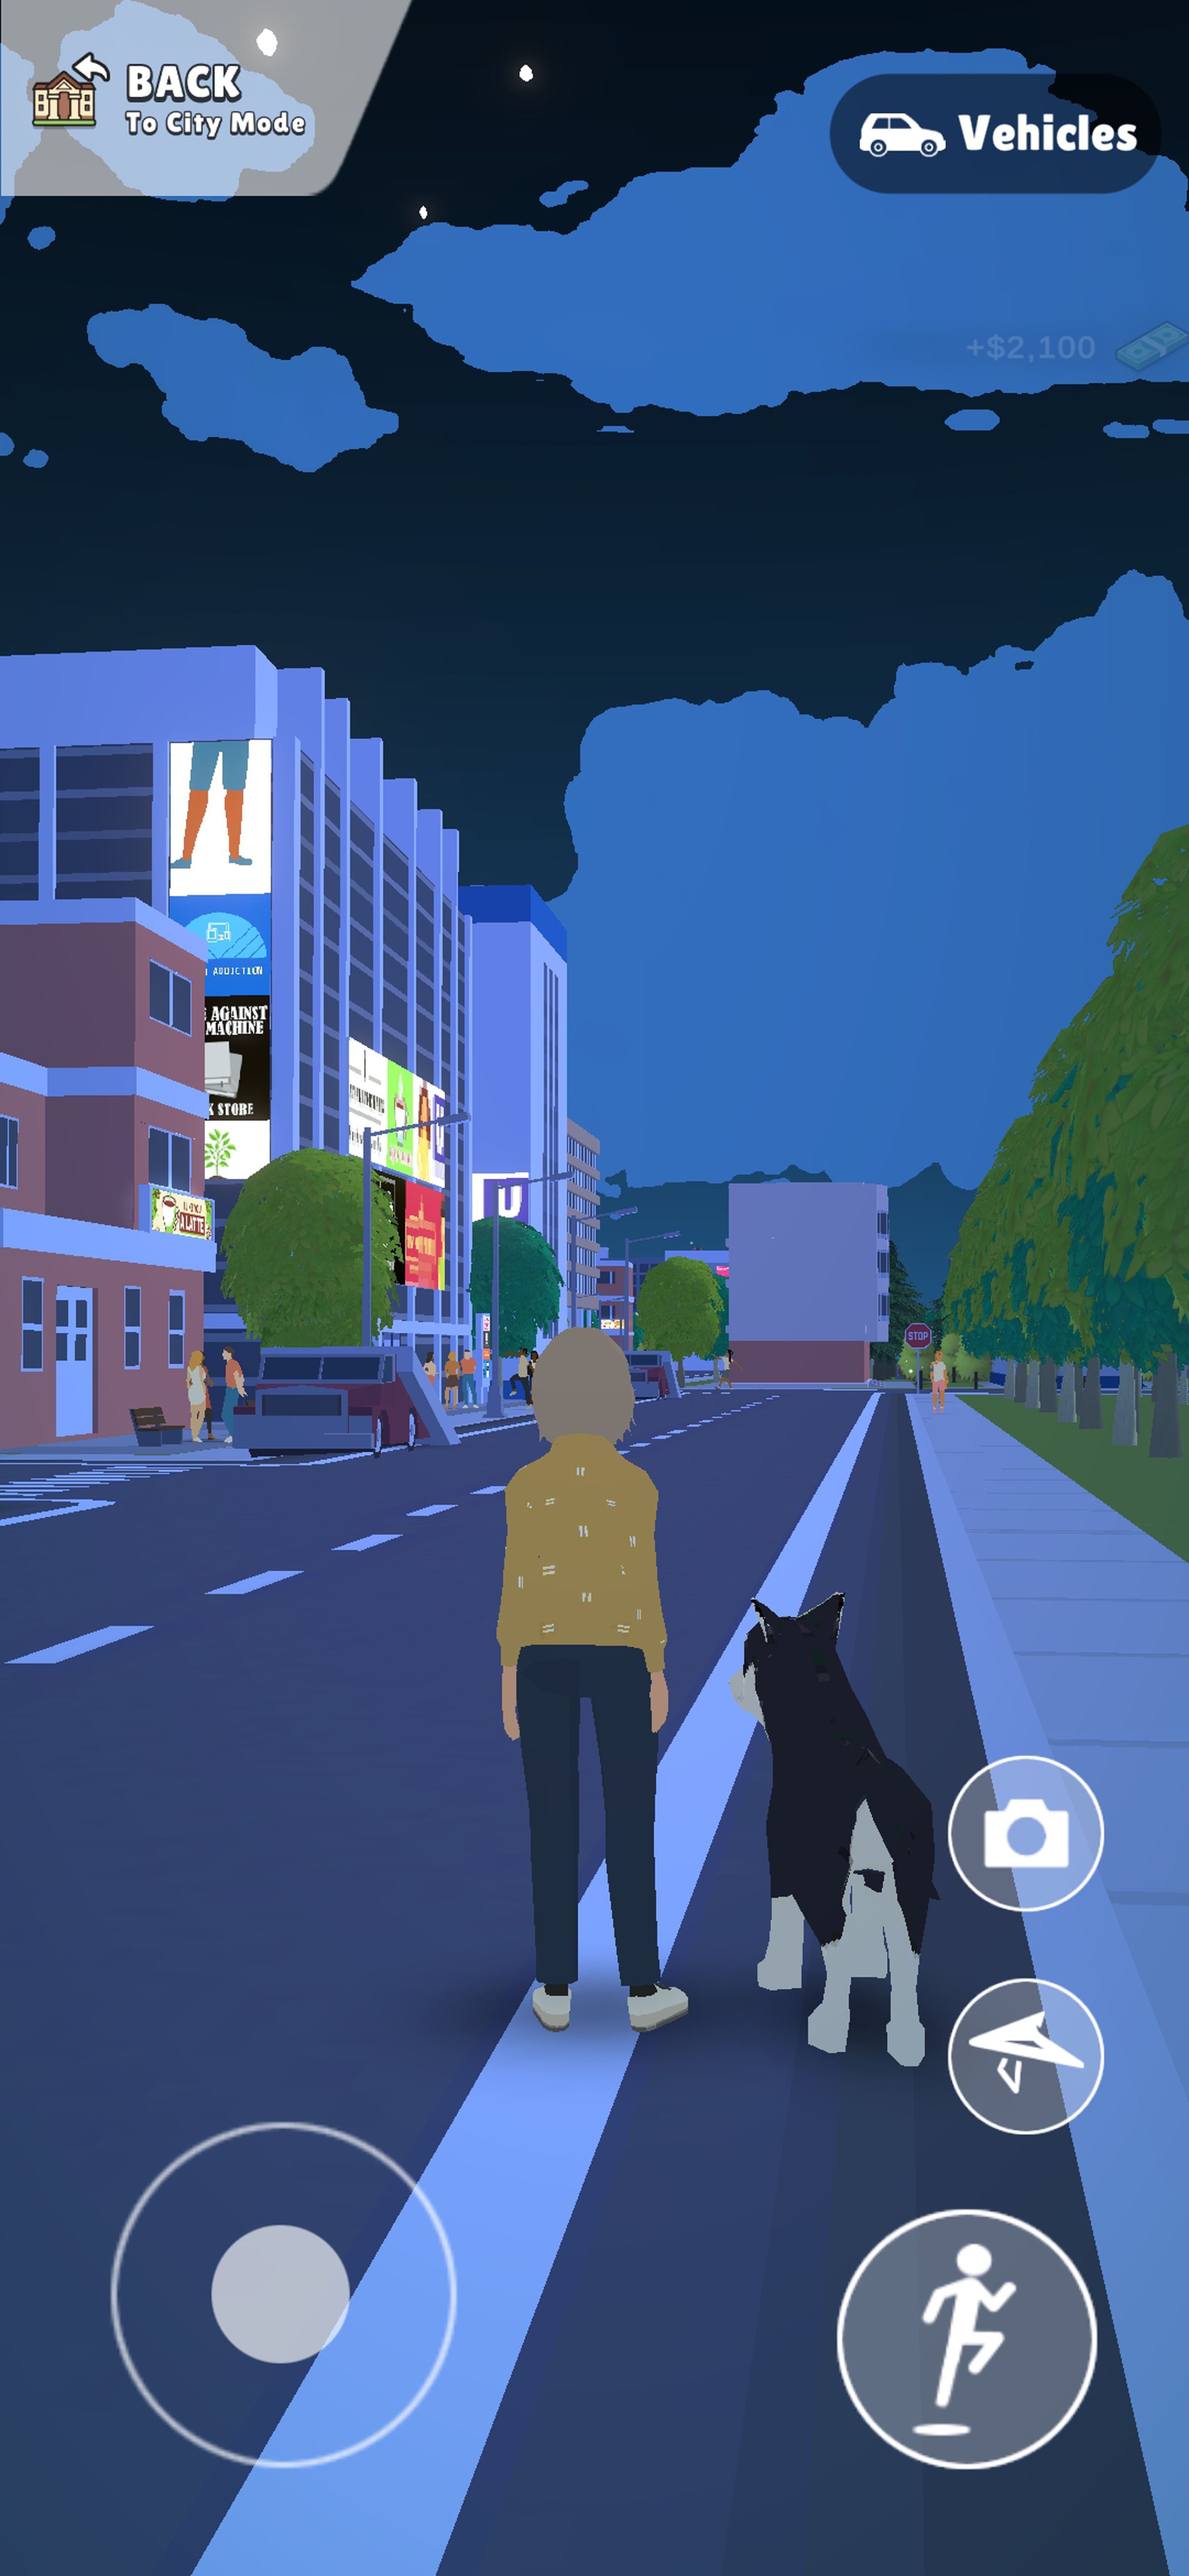 Screenshot of Pocket City 2 showing 3D view with avatar and dog standing on the street.